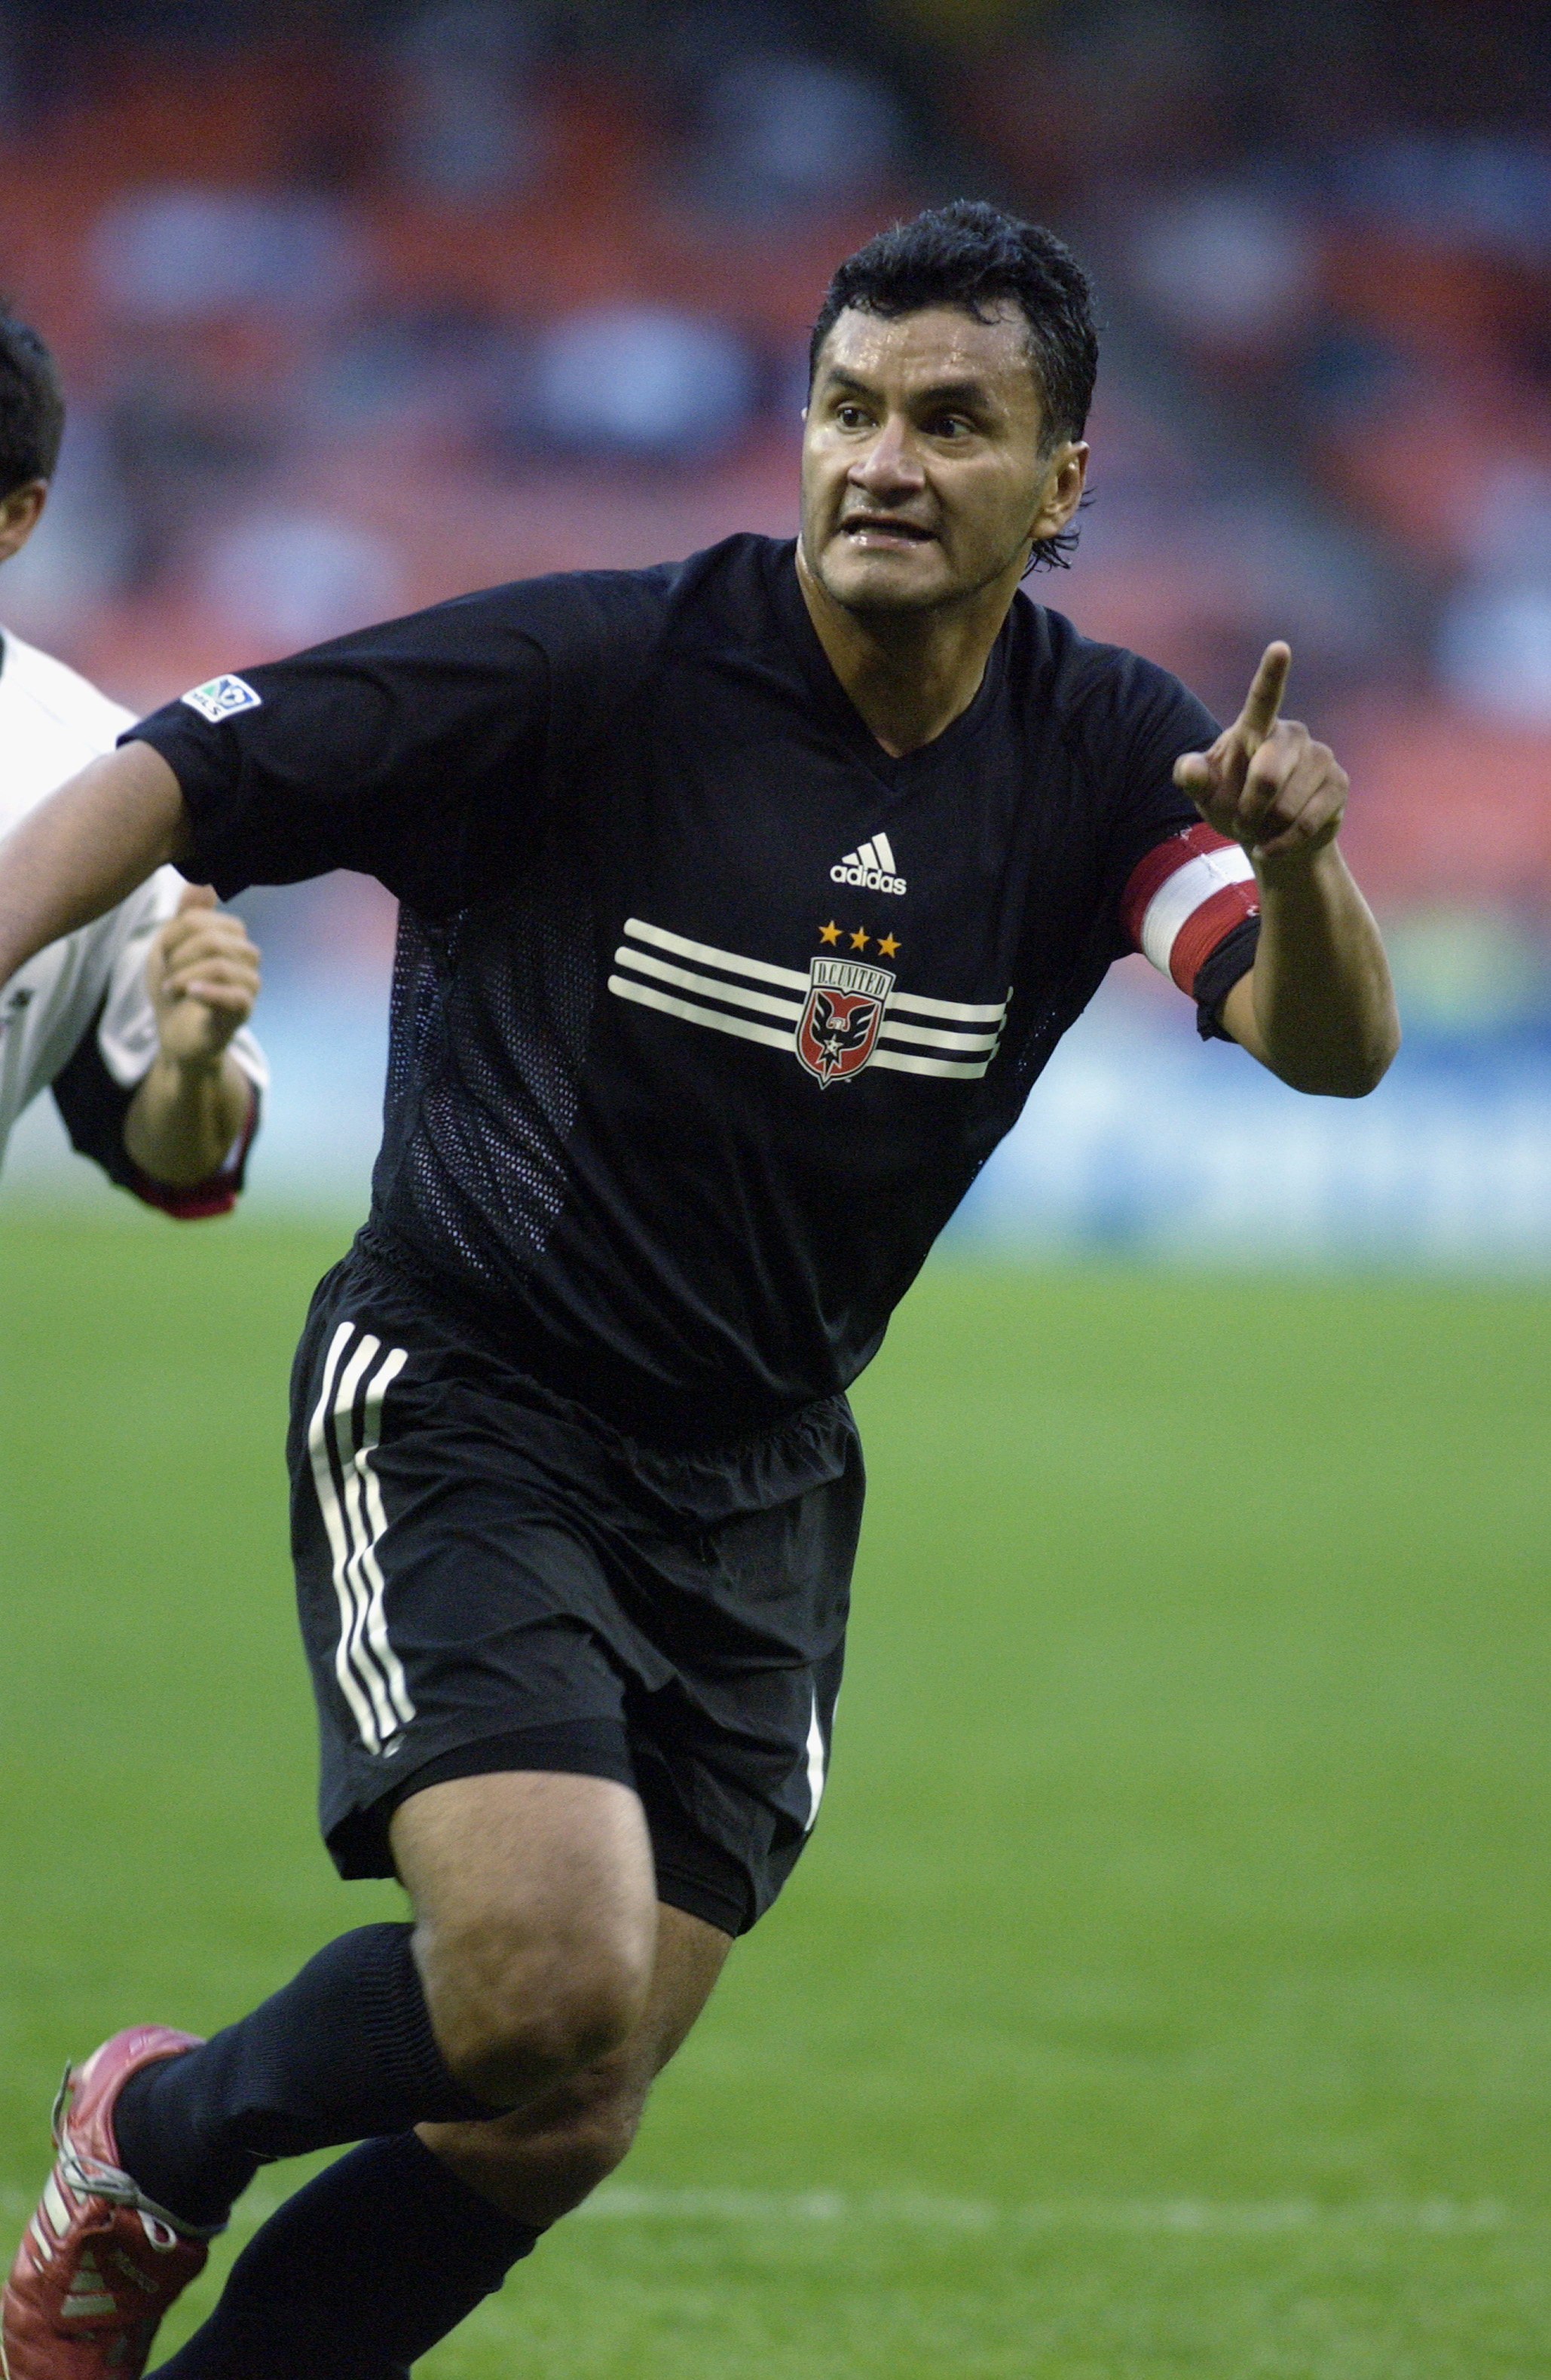 WASHINGTON - MAY 3:  Marco Etcheverry #10 of the D.C. United runs during the MLS match against the Dallas Burn on May 3, 2003 at RFK Stadium in Washington, D.C.  The game ended in a scoreless draw. (Photo by Greg Fiume/Getty Images)